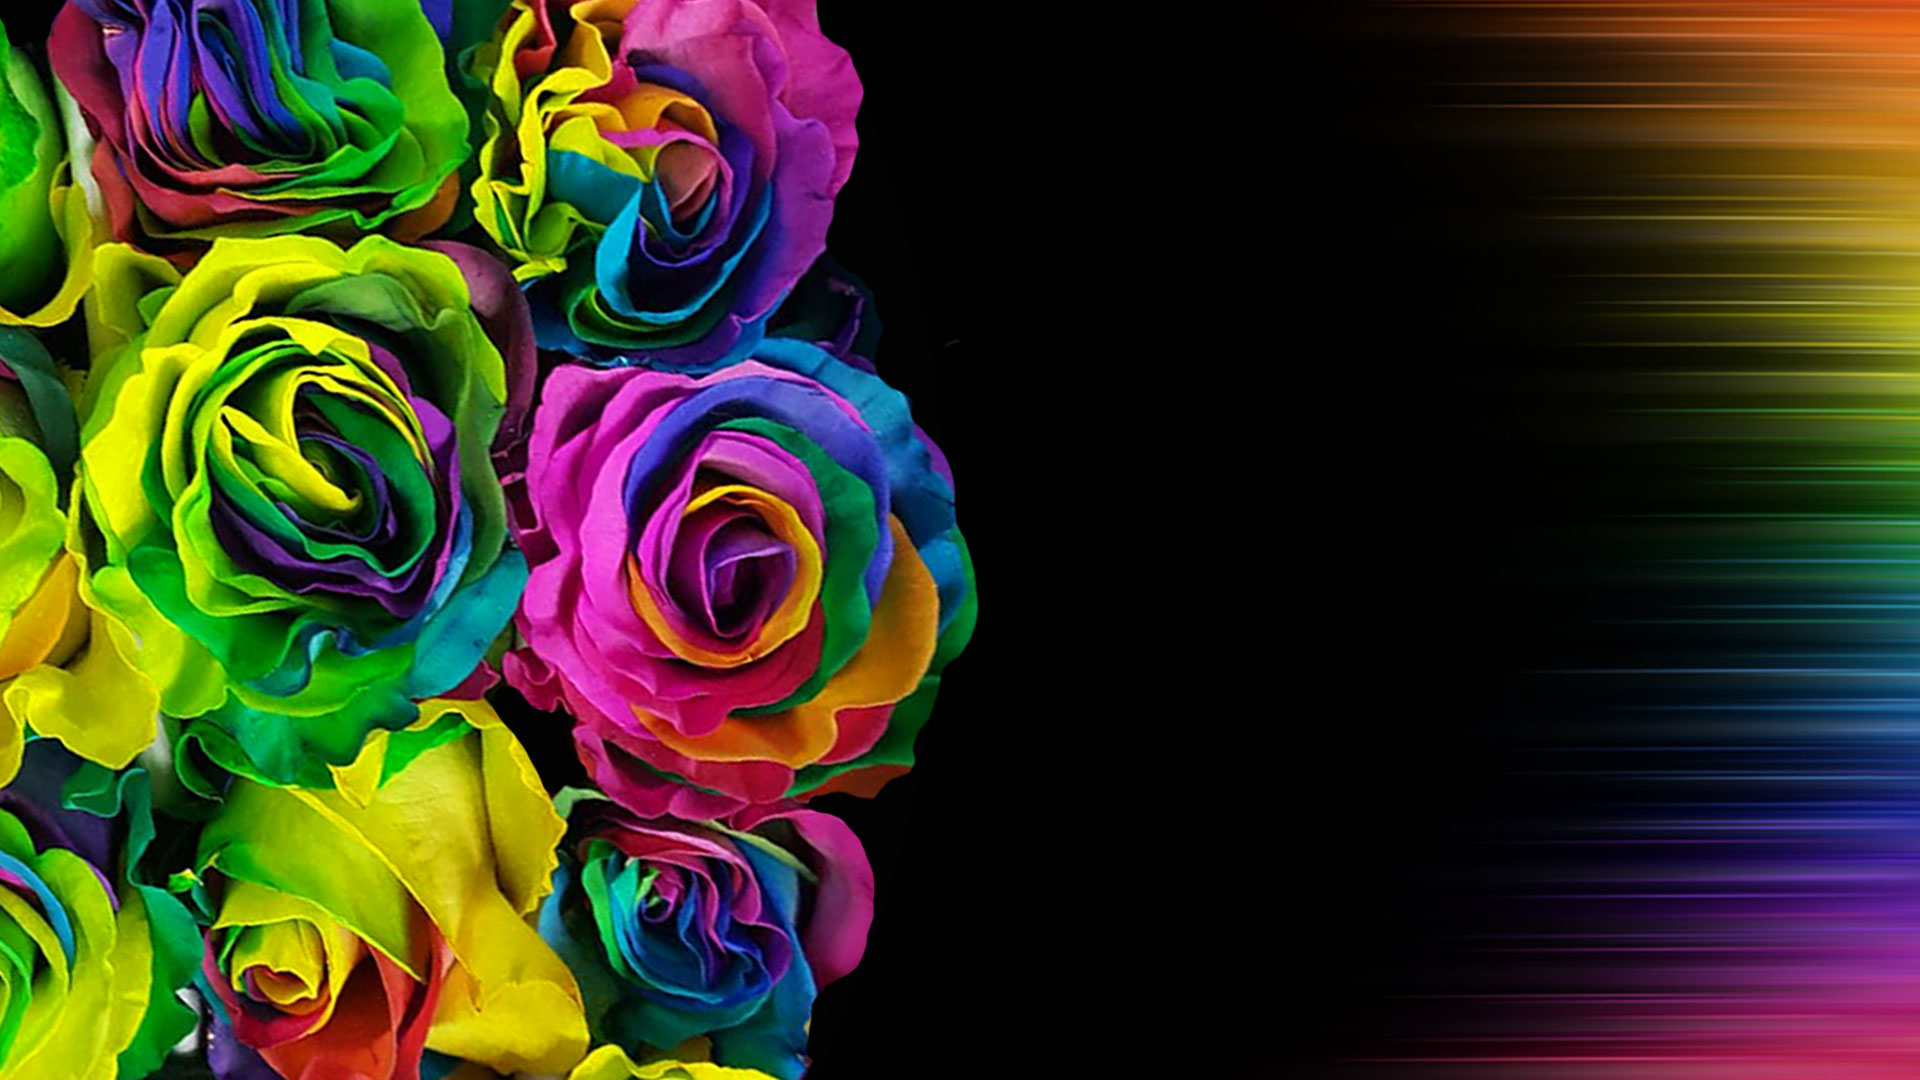 Psychedelic Roses - Rainbow Rose - HD Wallpaper 